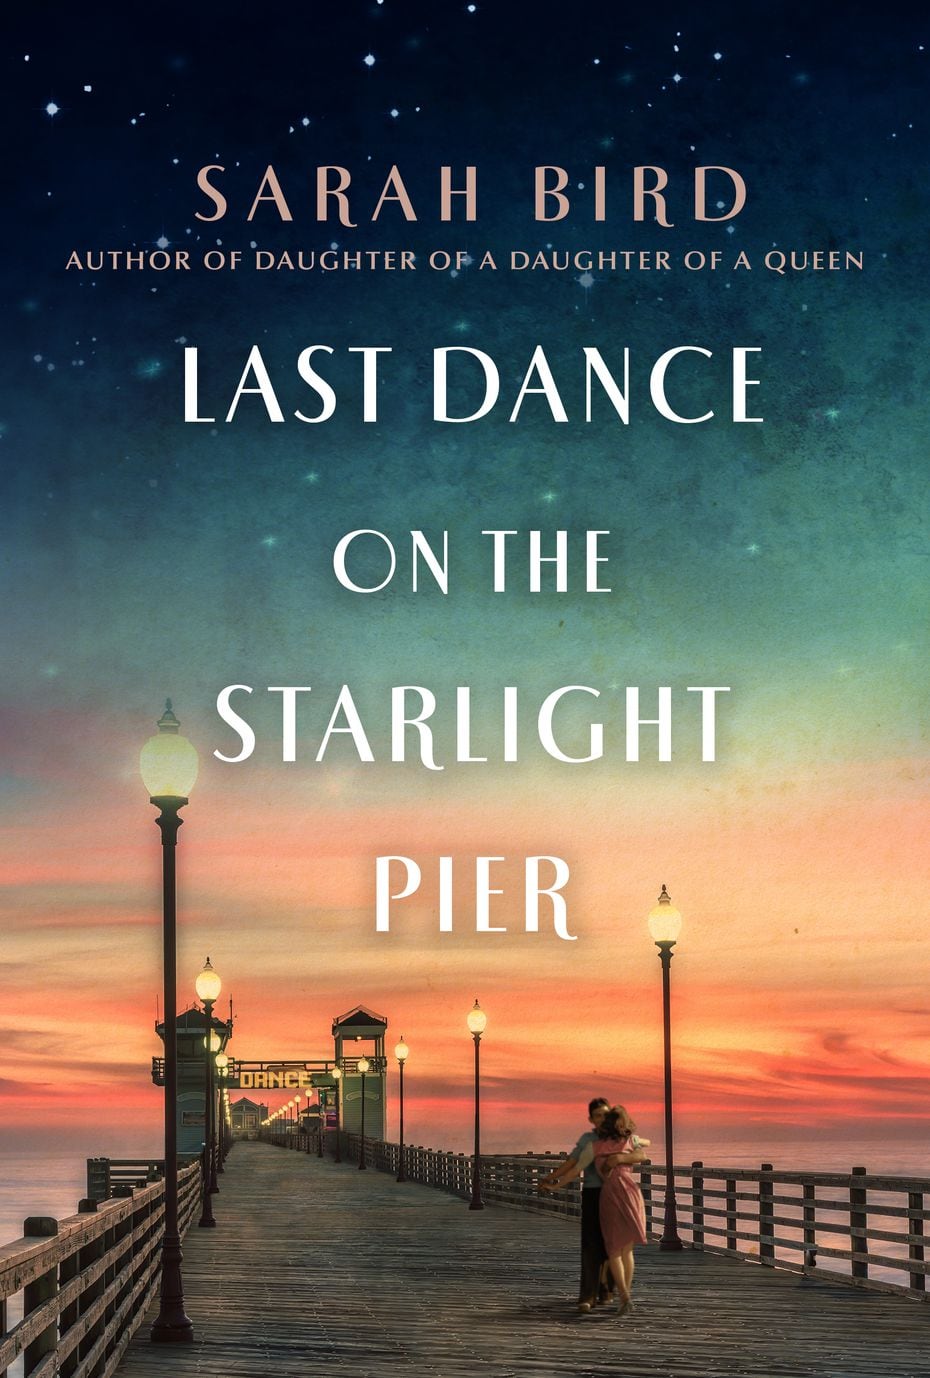 In Sarah Bird’s new novel, "Last Dance on the Starlight Pier," a young woman seeks to better...